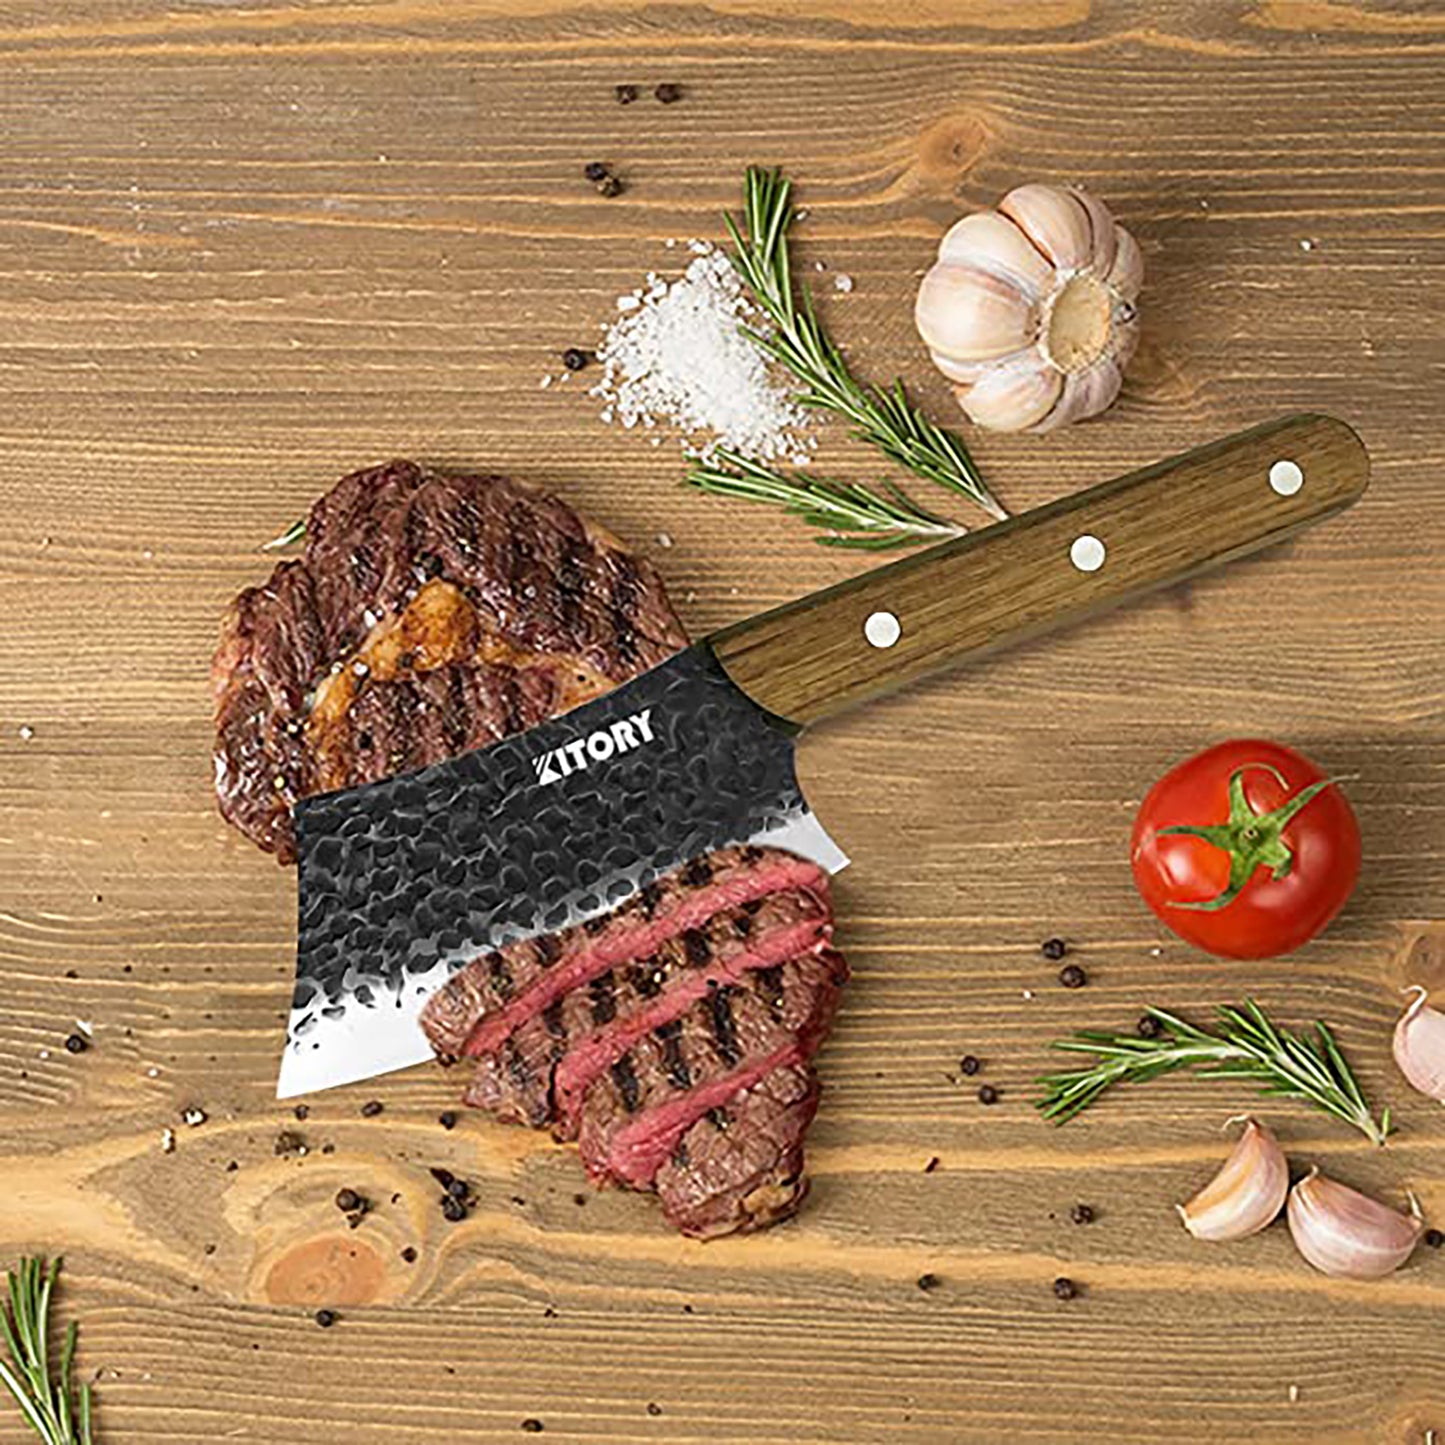 Kitory Little Multi-functional Steak Knife  5 Inch Small Blade